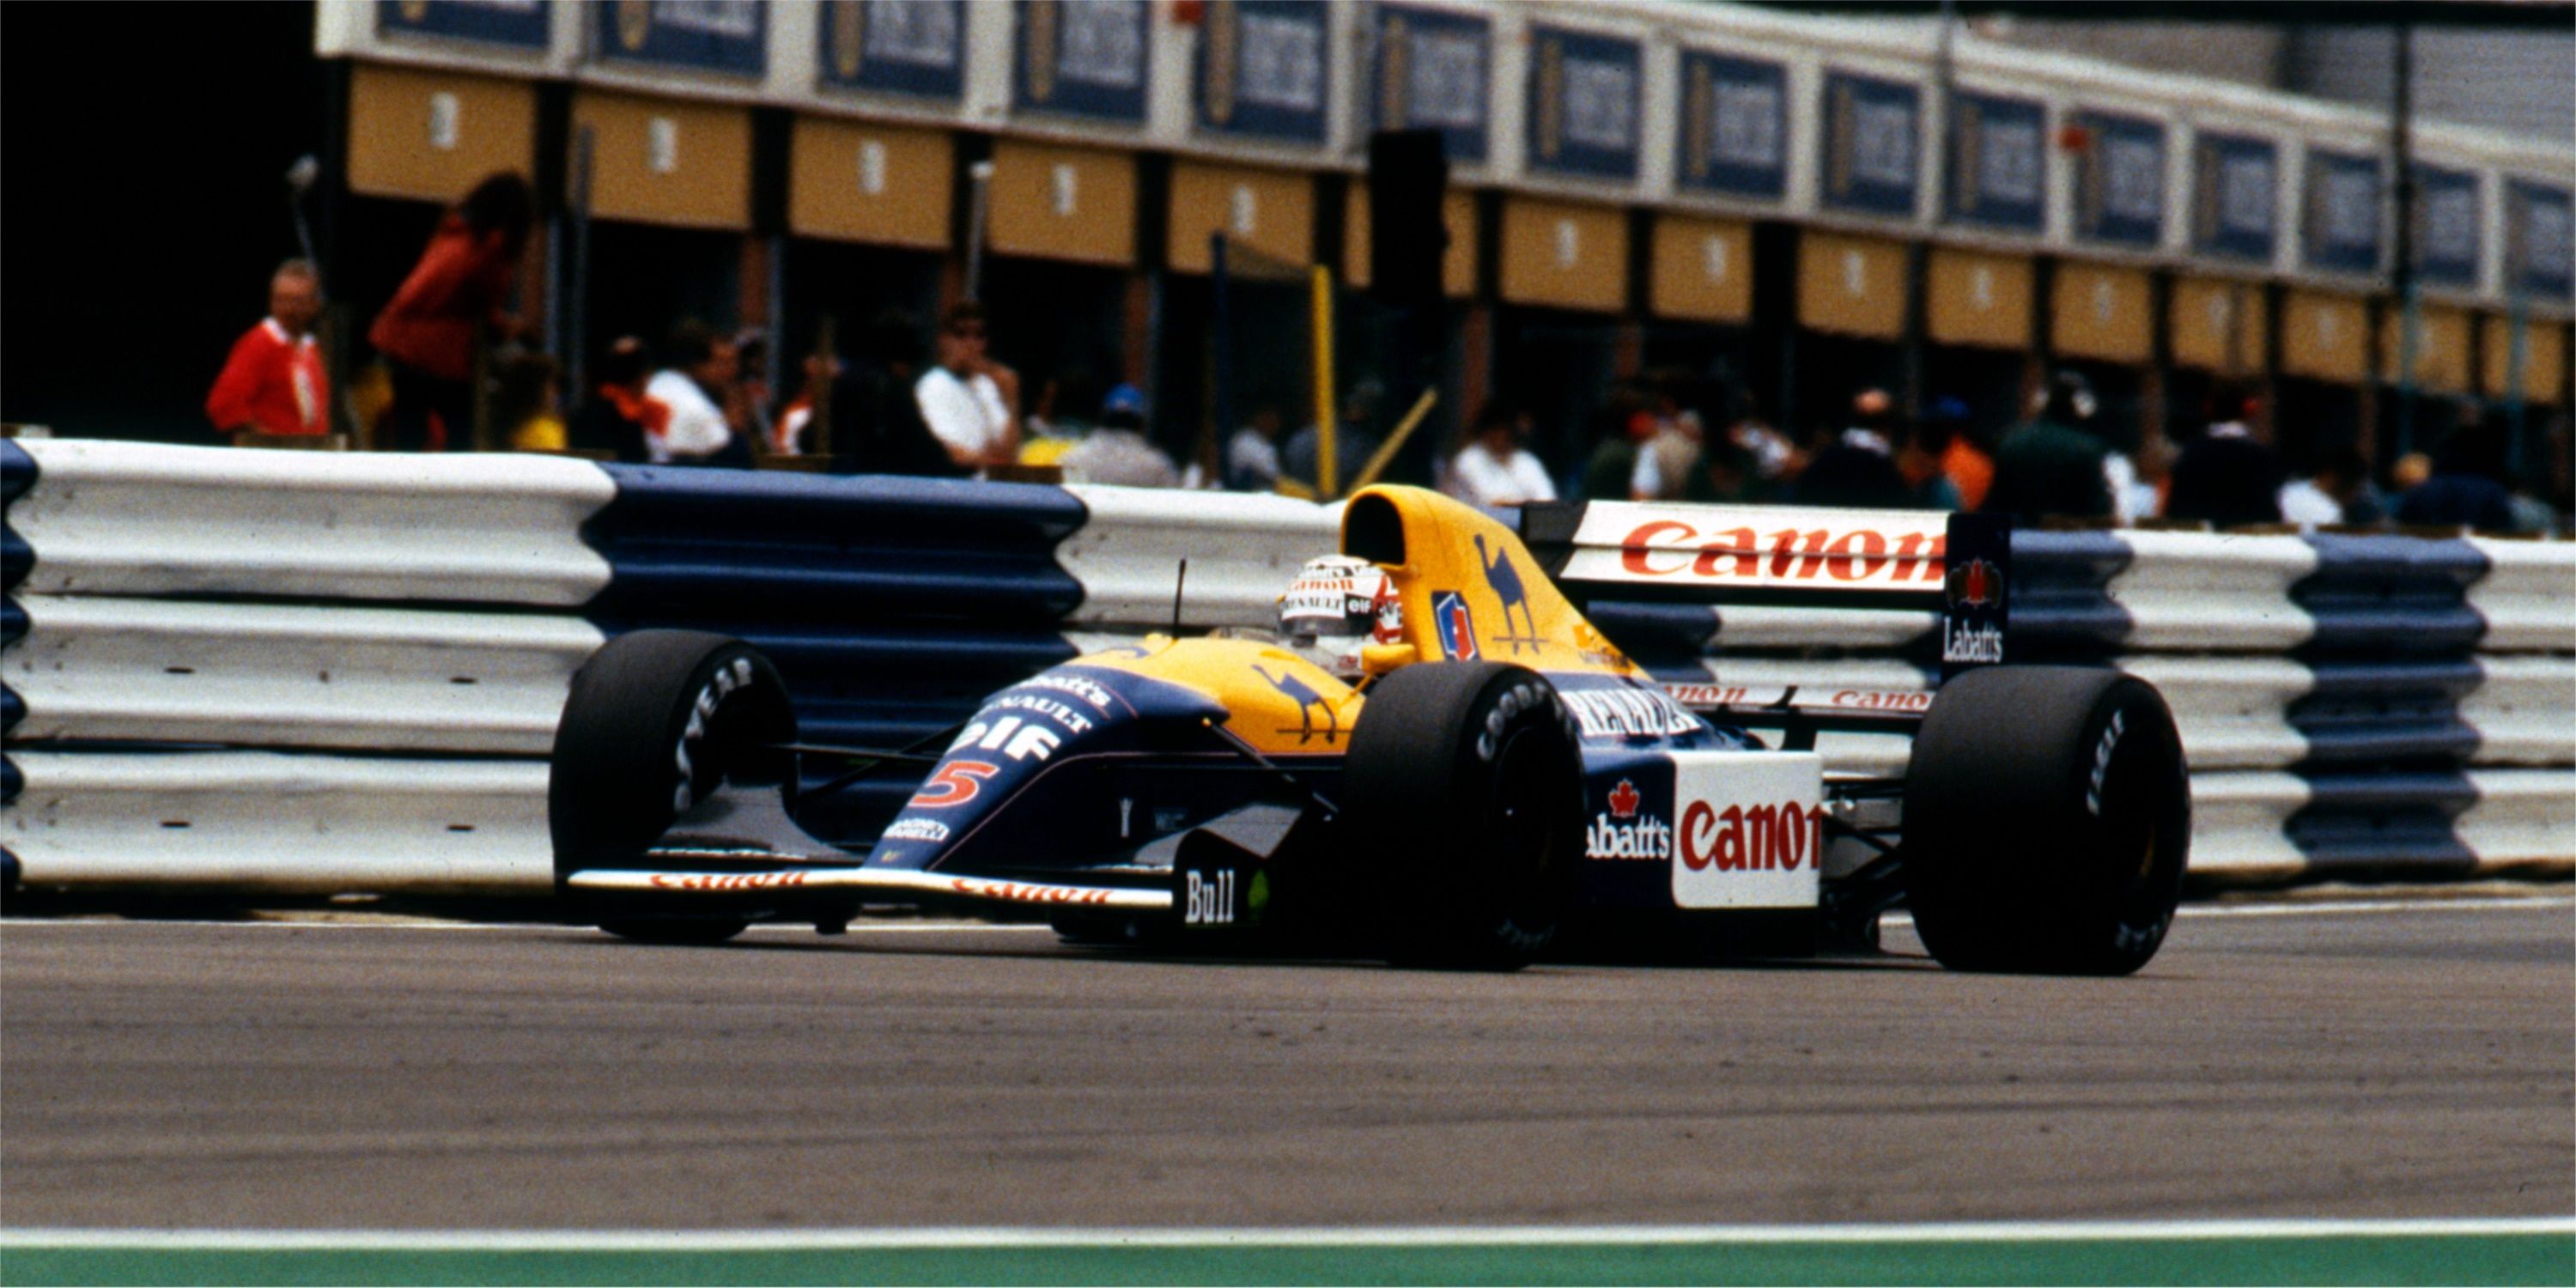 Nigel Mansell driving the Williams